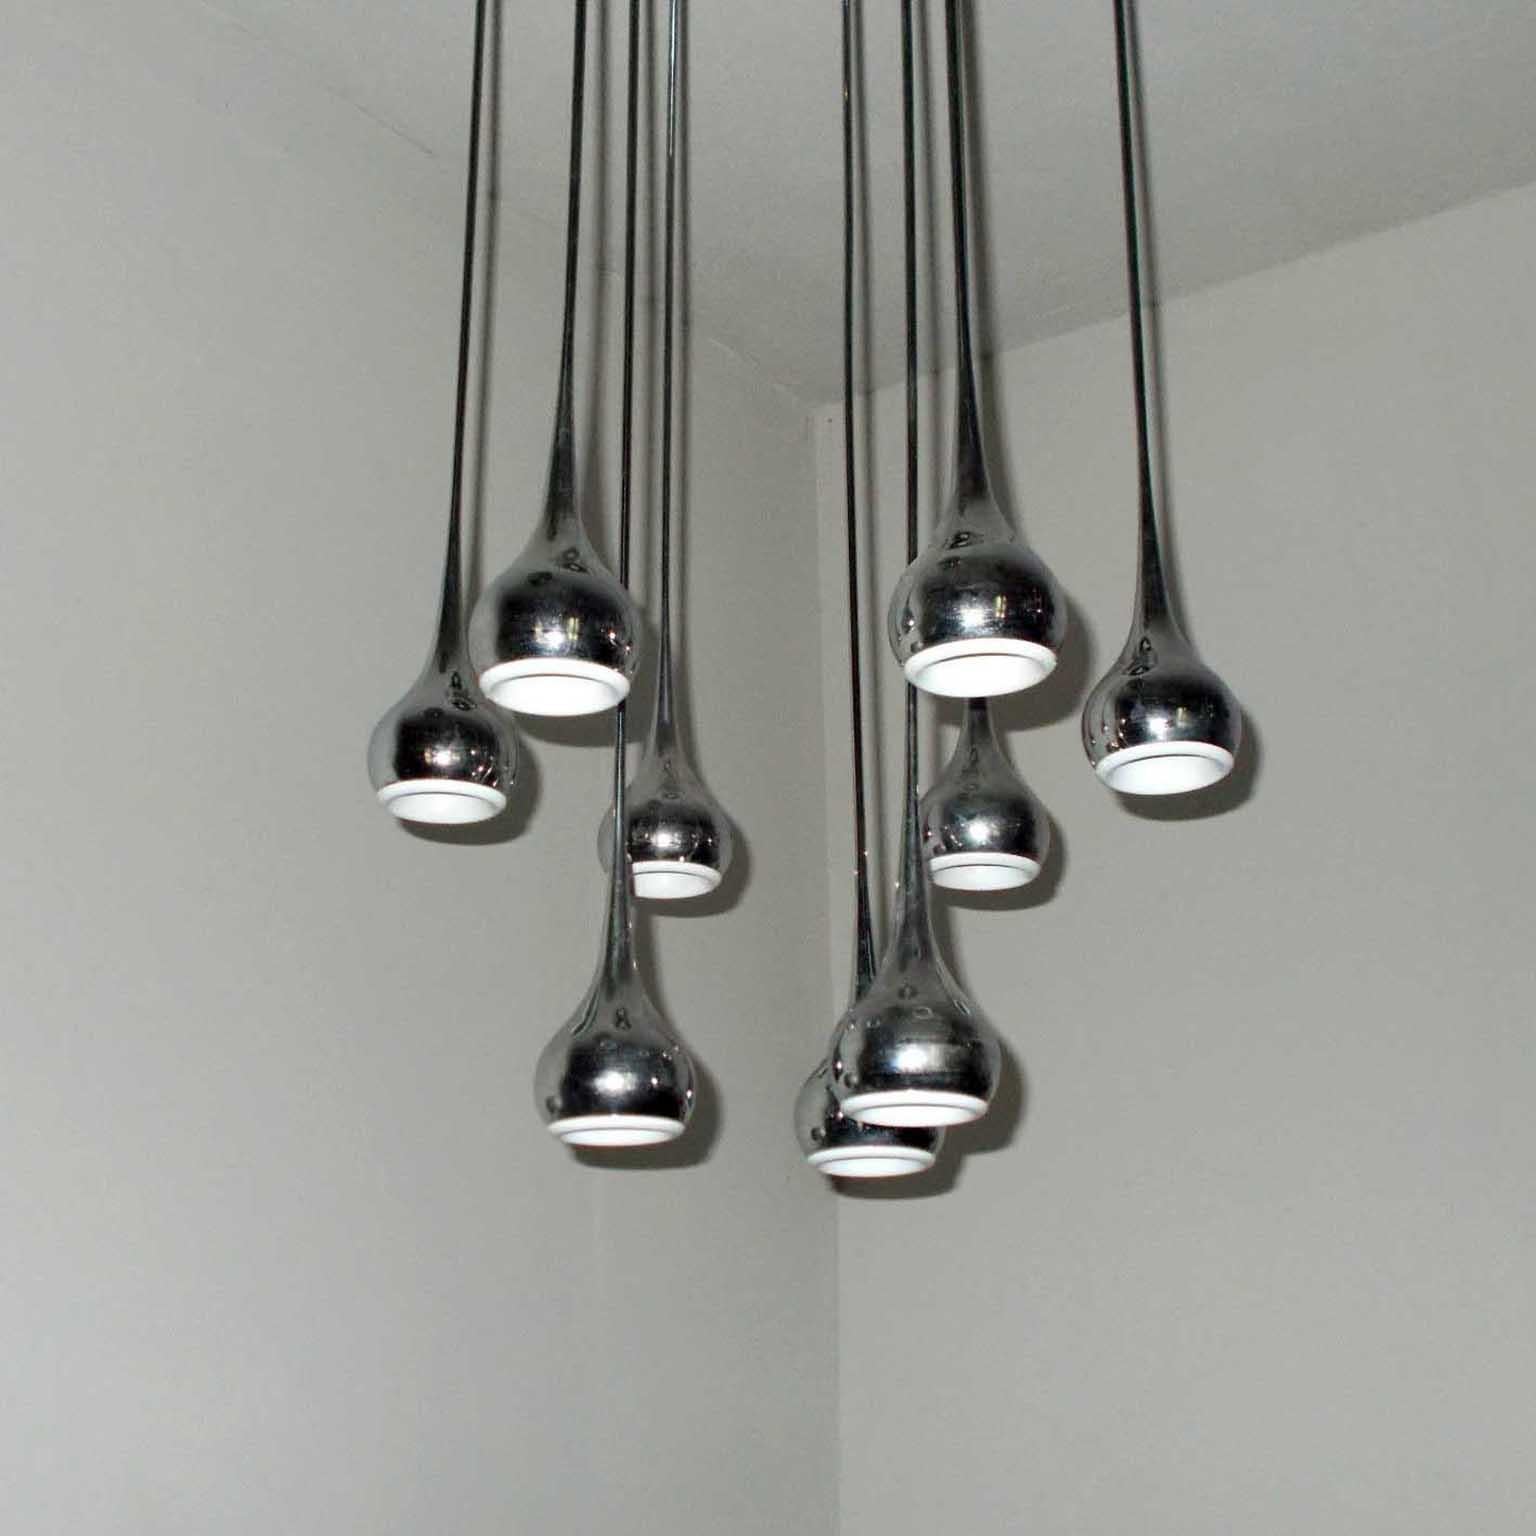 Italian Waterfall Midcentury Chandelier Design by Angelo Brotto, Esperia, Italy, 1960s For Sale